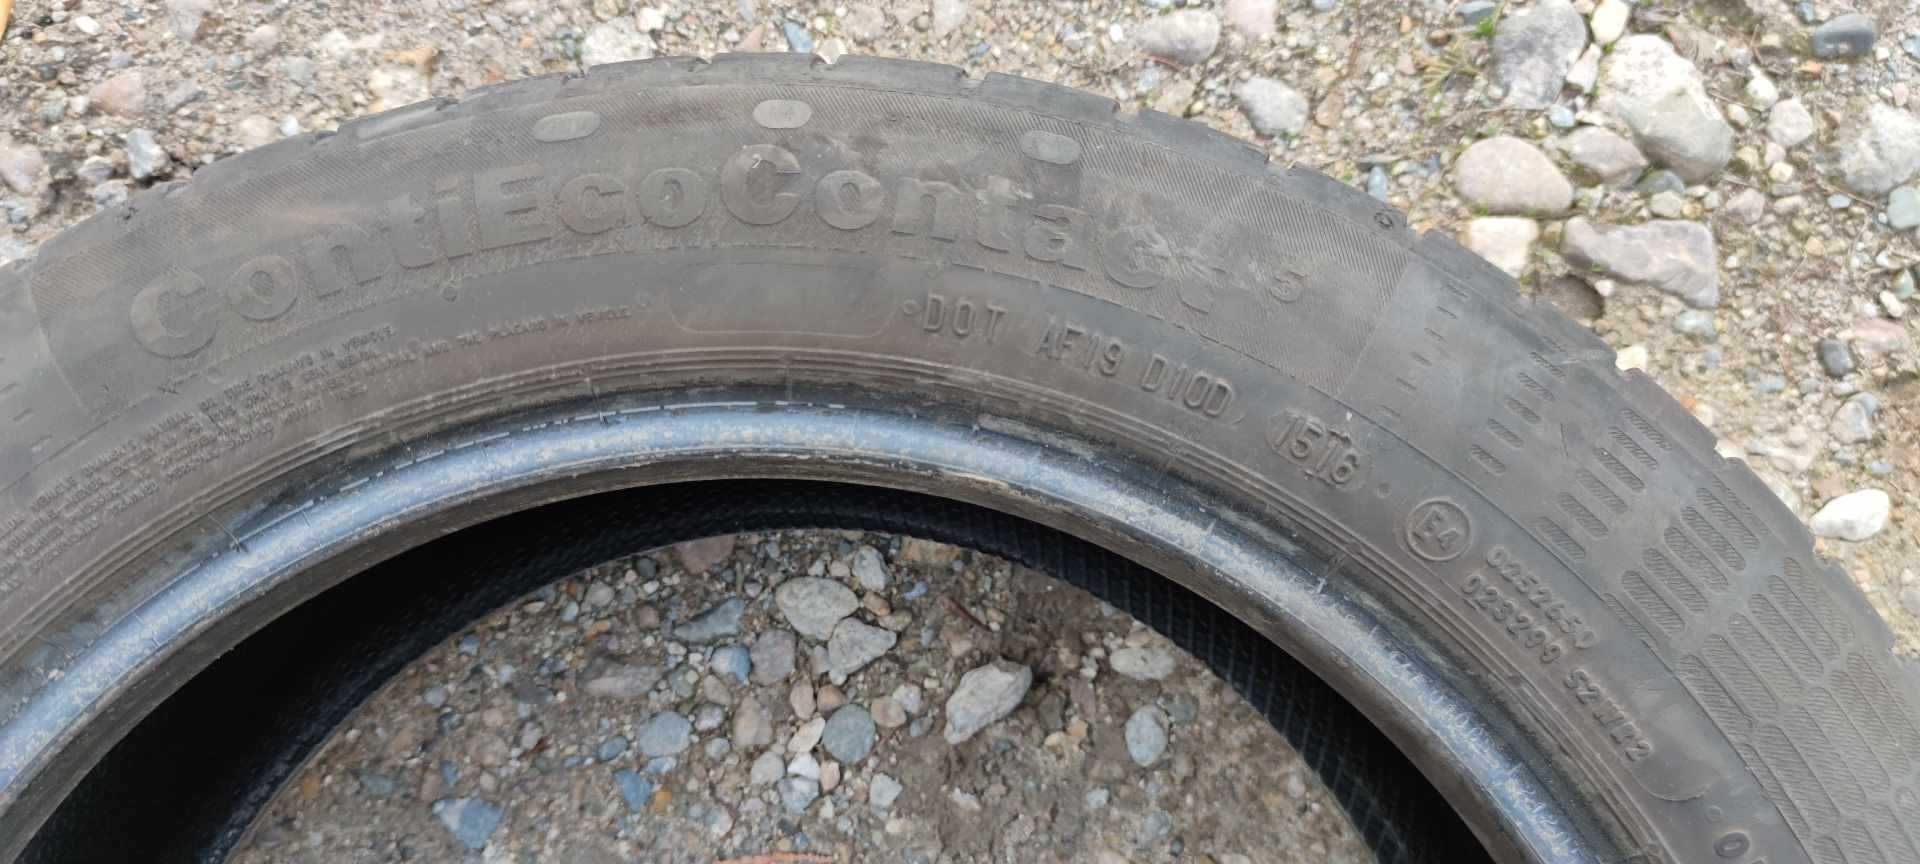 195/55R16 Continental ContiEcoContact5 - 4 бр летни гуми